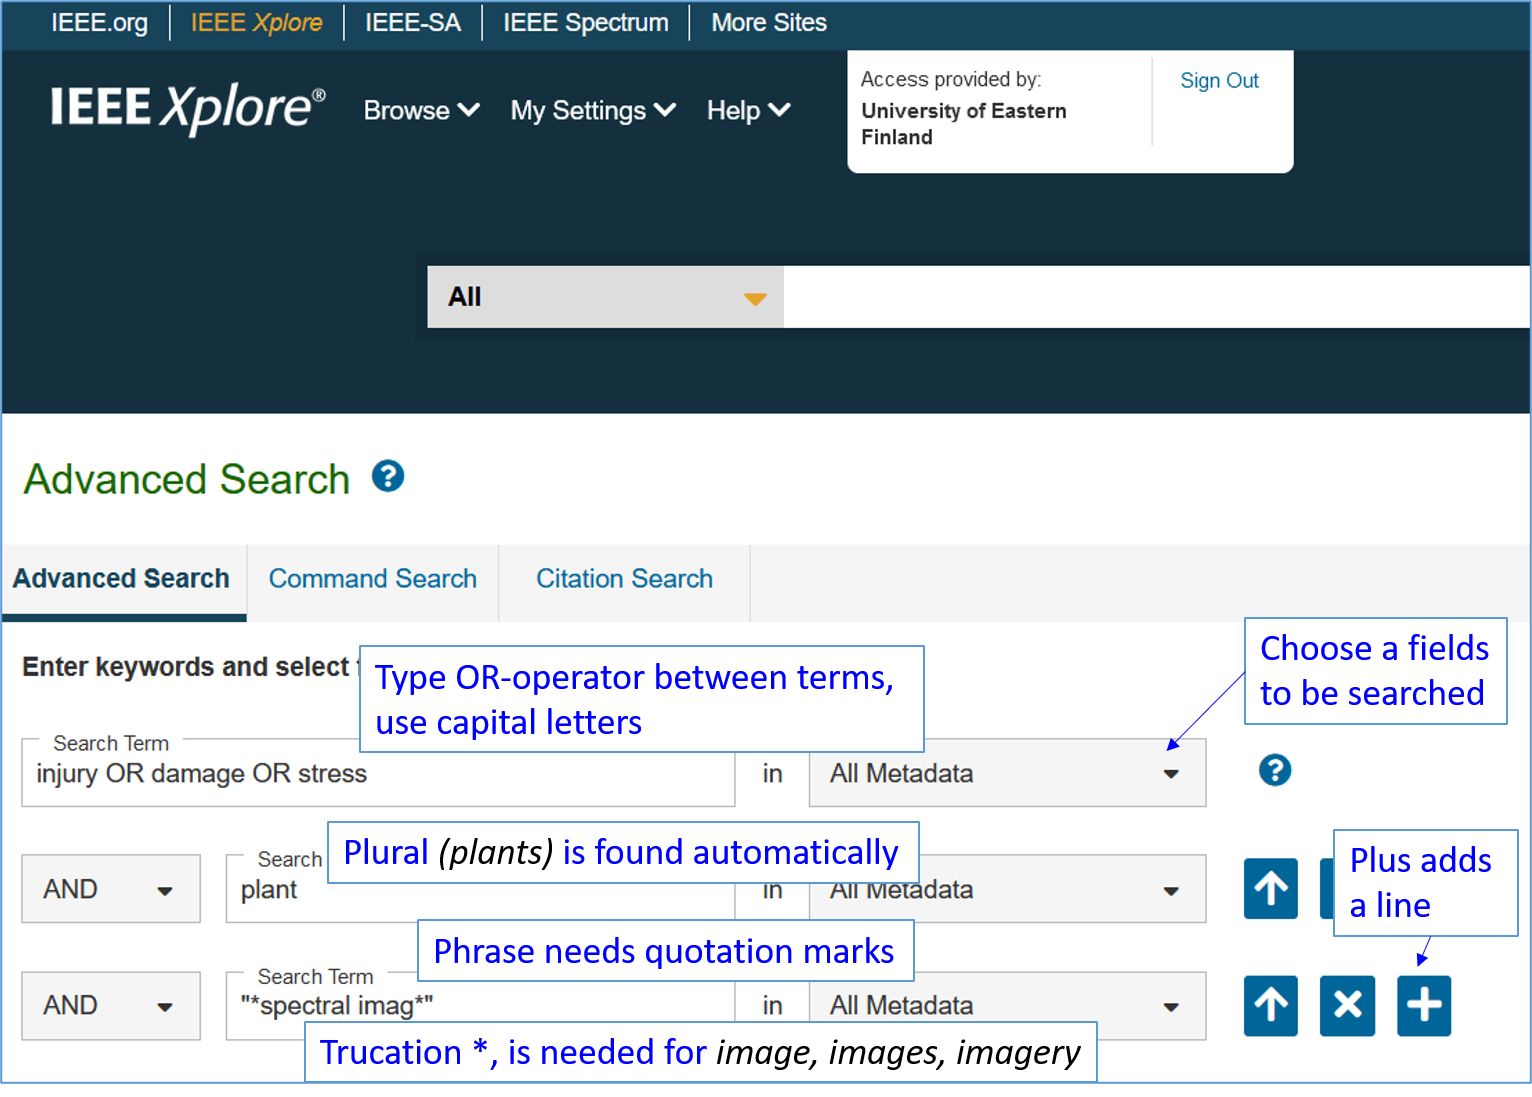 A screen capture of IEEE xplore search page. The query is written in three boxes. The first box: injury or damage or. The second box: plant*. The third box: “*spectral imag*”. There is an AND-operator between the boxes. Explanations: Type or-operator between terms, use capital letters. Plural (plants) is found automatically. A phrase needs quotation marks. Truncation, *, I needed for image, images, imagery. On the right side pull-down menus: Choose a fields to be searched for. A plus adds one search box more.